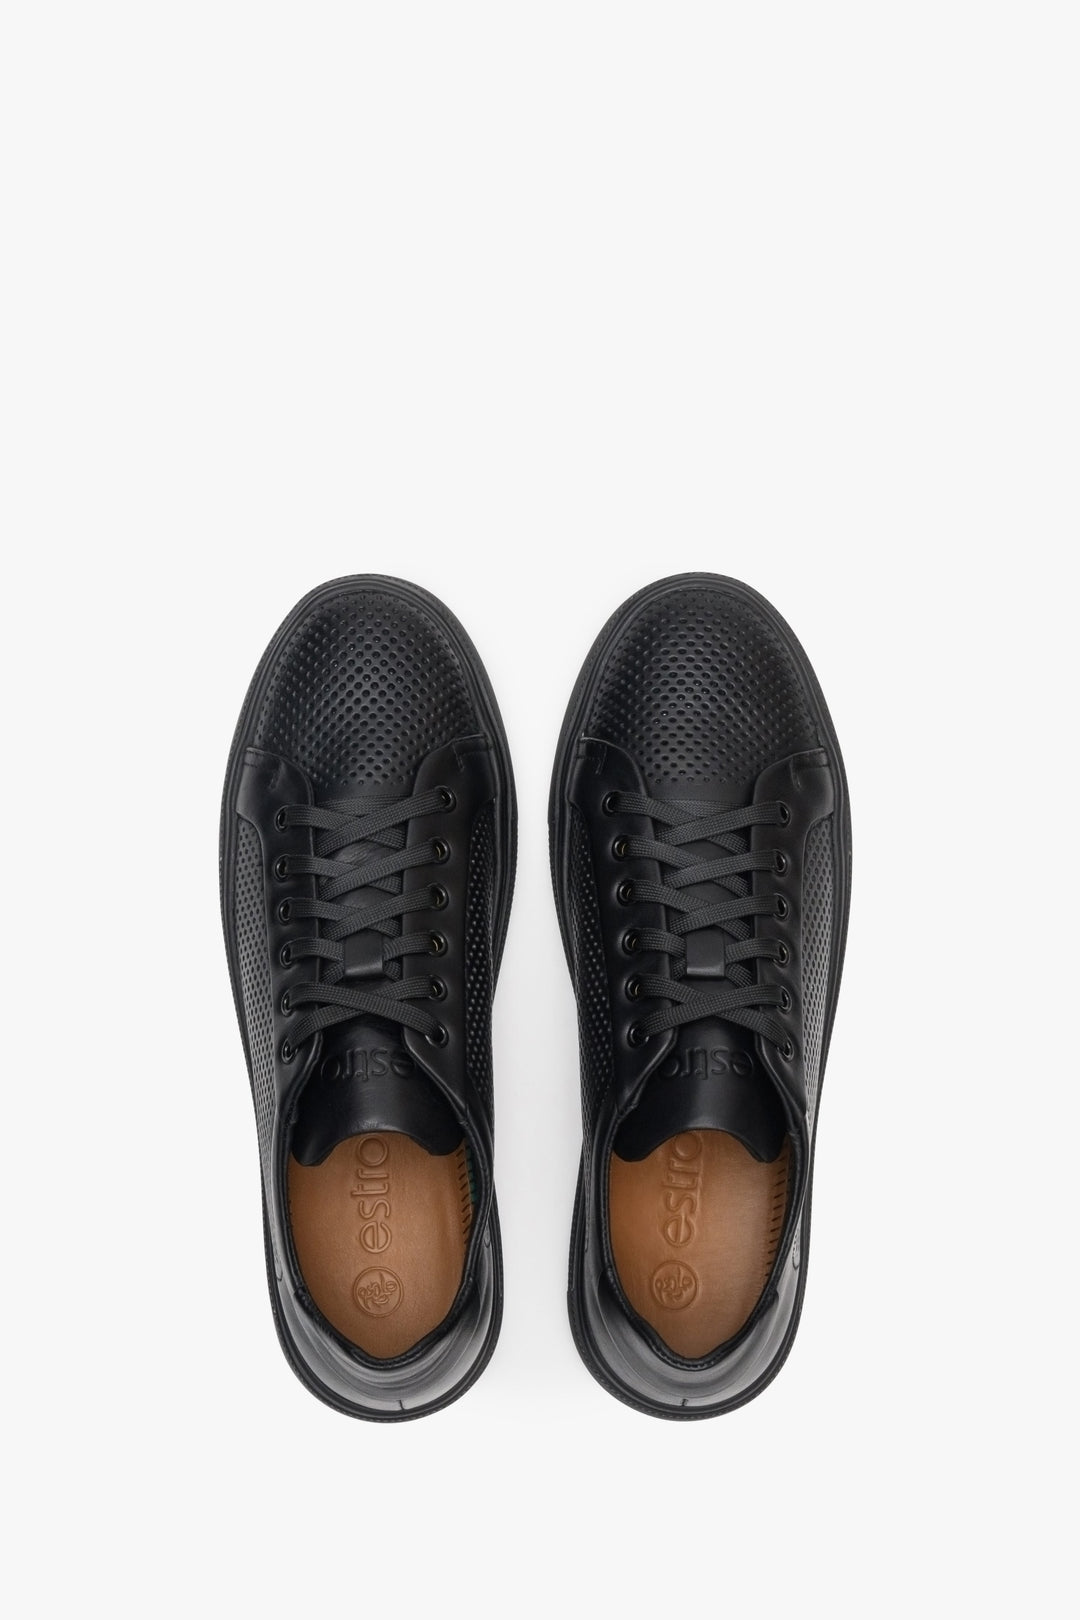 Men's black leather sneakers with perforations - top view presentation of the footwear.